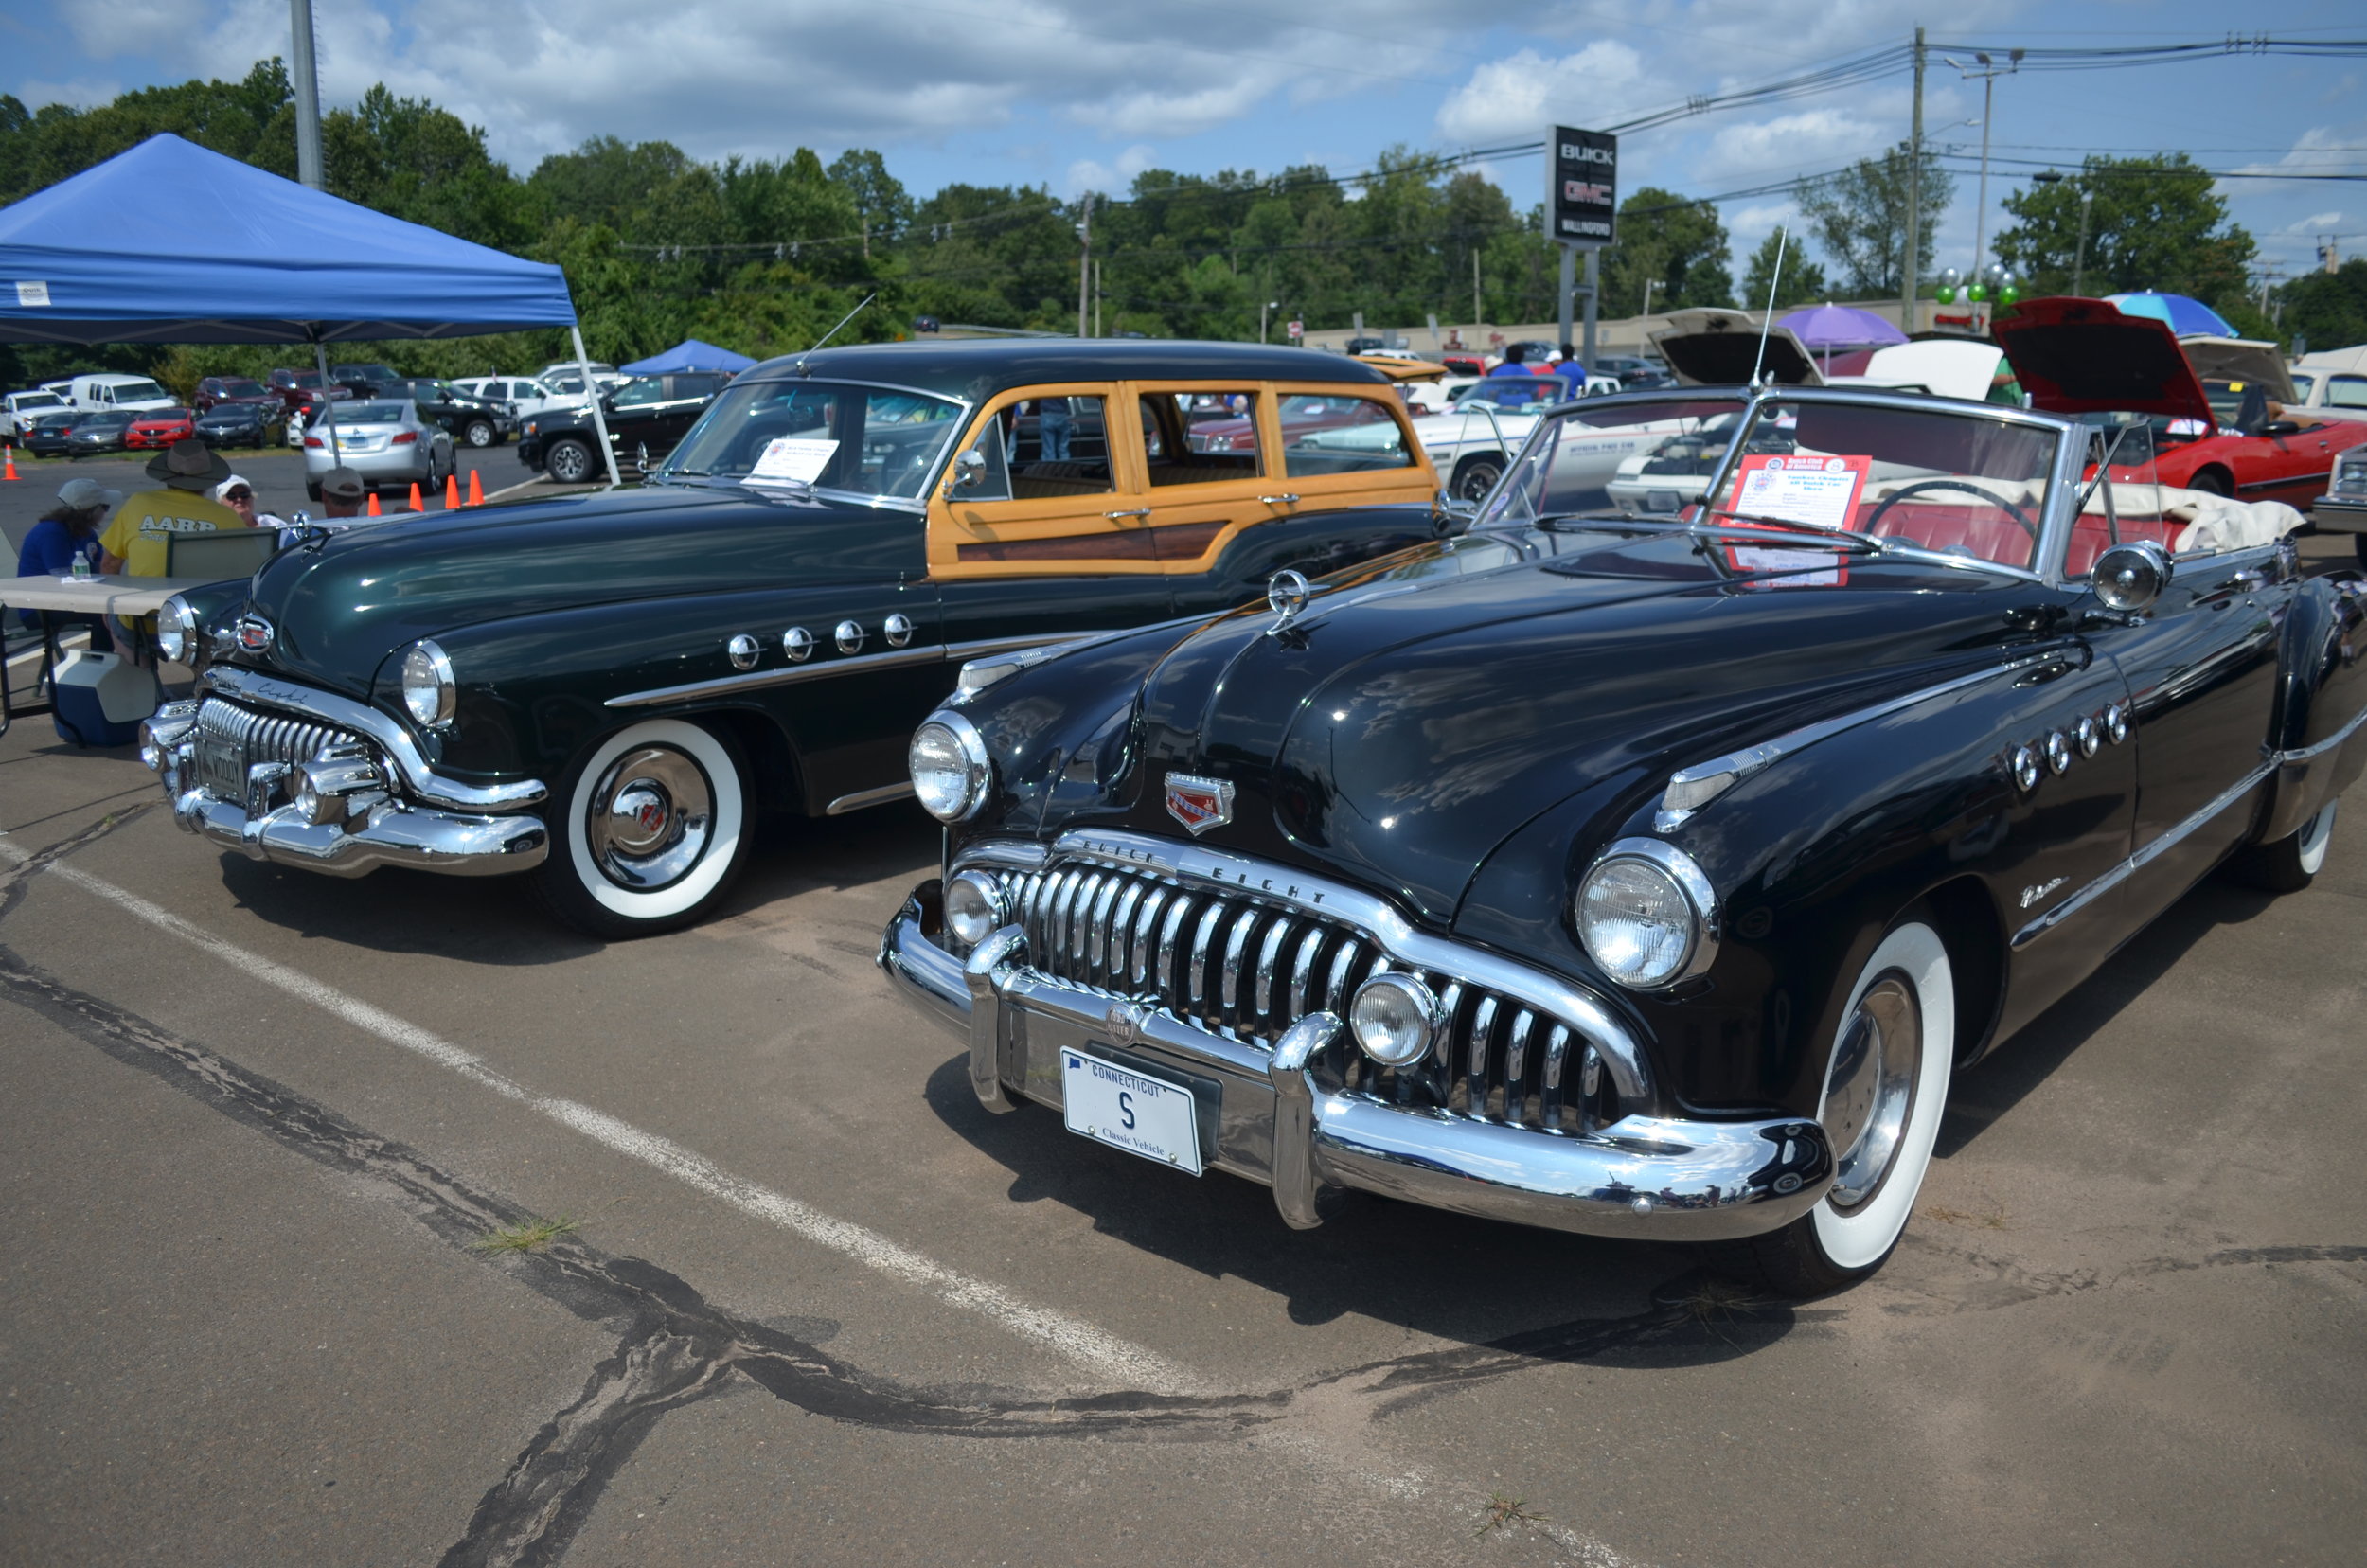 Wallingford, Ct, Buick Show, August 2017